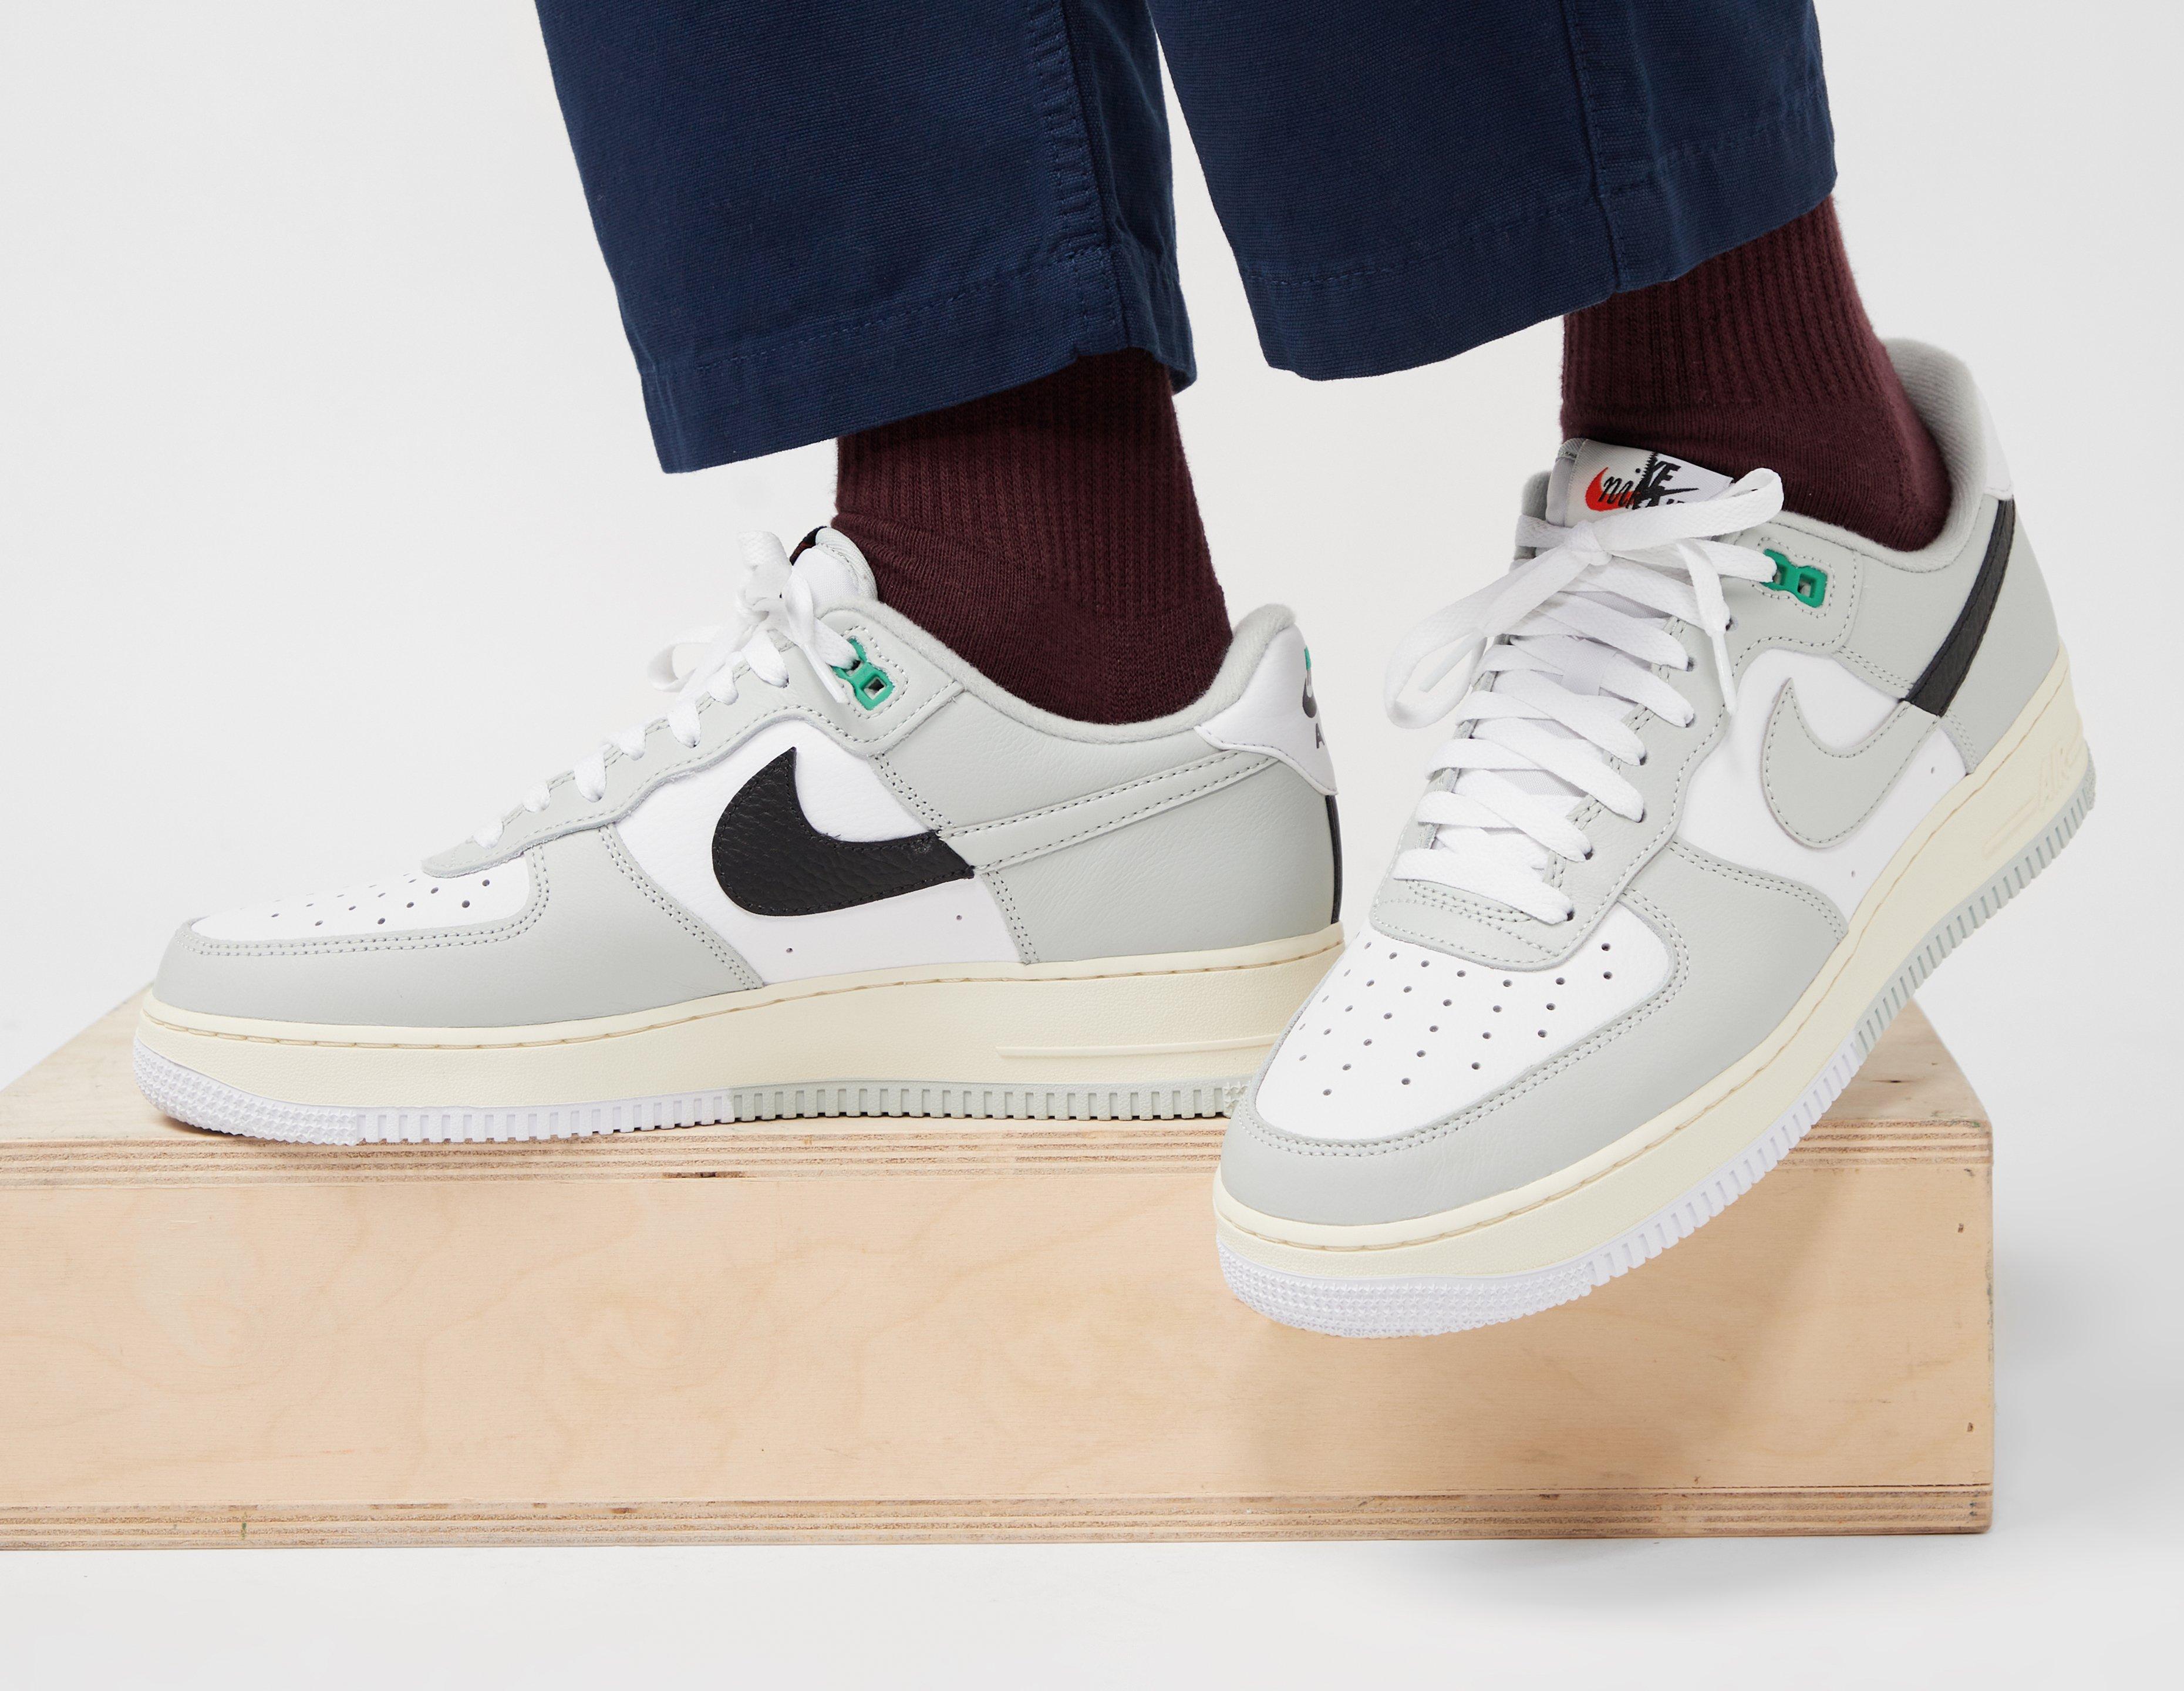 Nike Men's Air Force 1 Sneakers in White in White/Sail/Platinum Tint, Size UK 8.5 | End Clothing